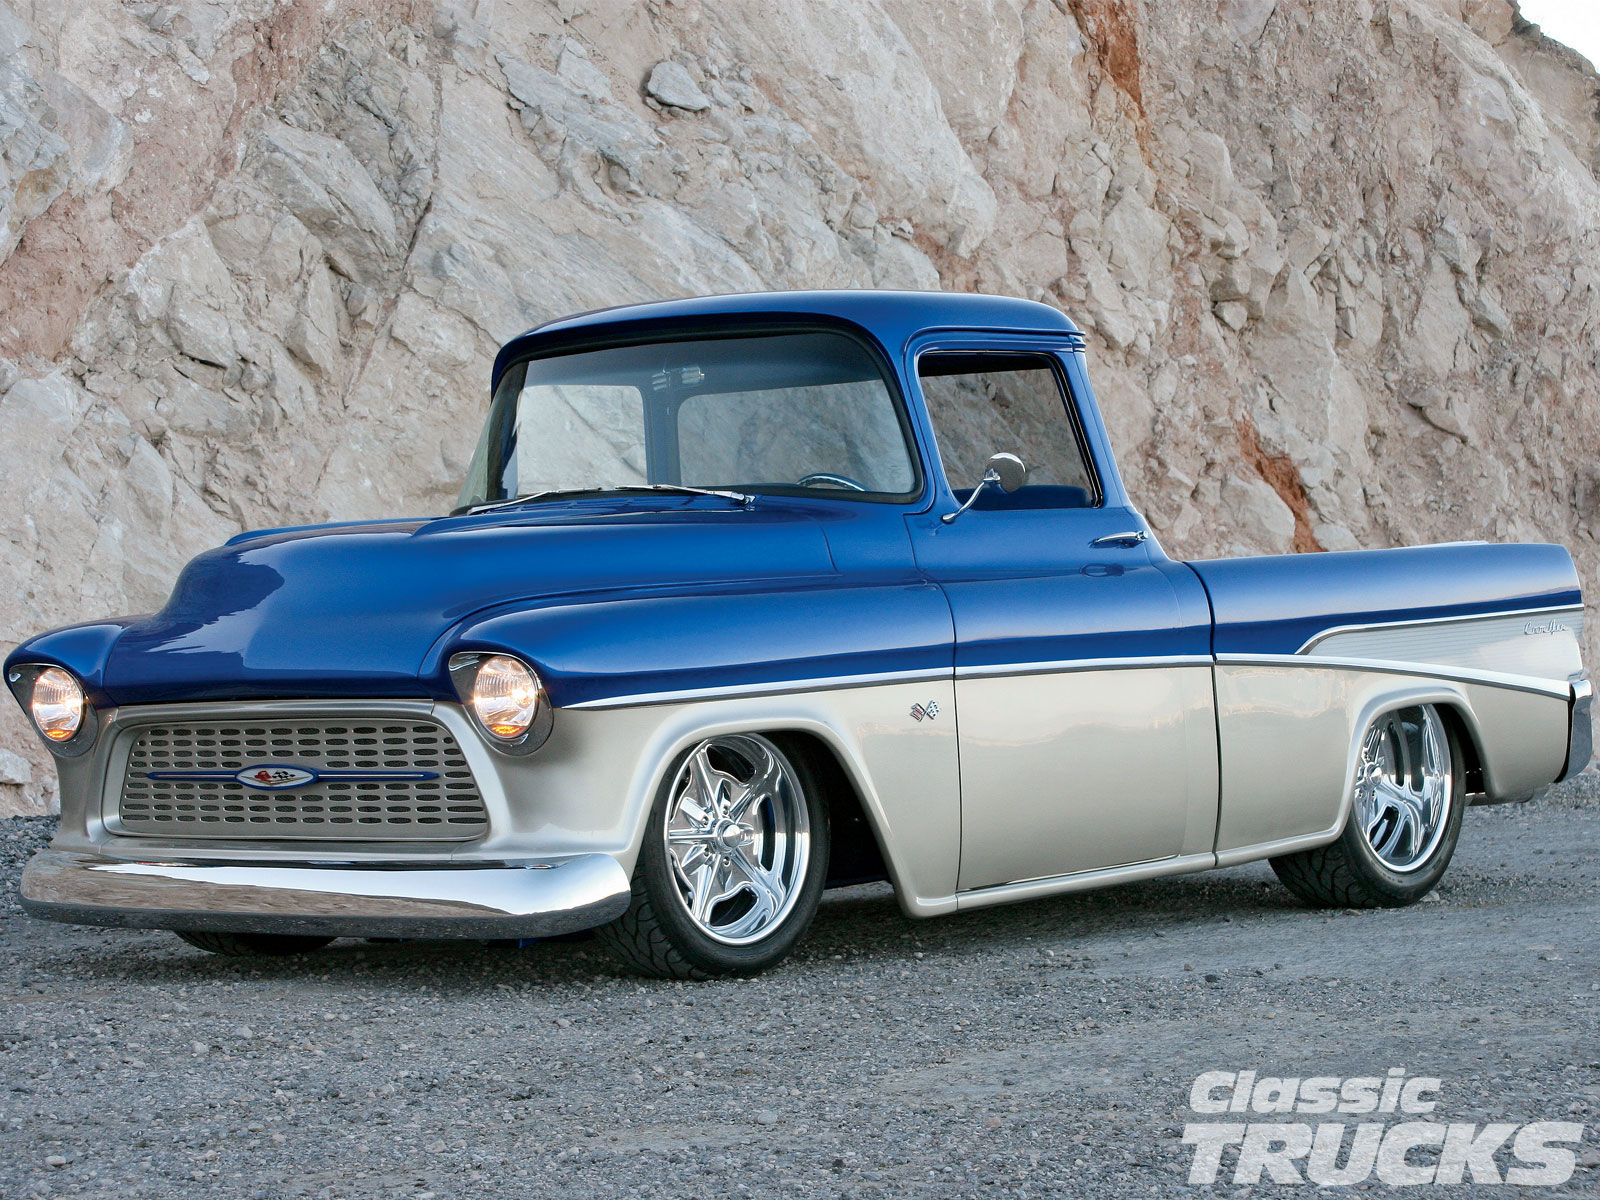 1955 chevrolet cameo pickup hotrod pictures - Hot Rod Cars